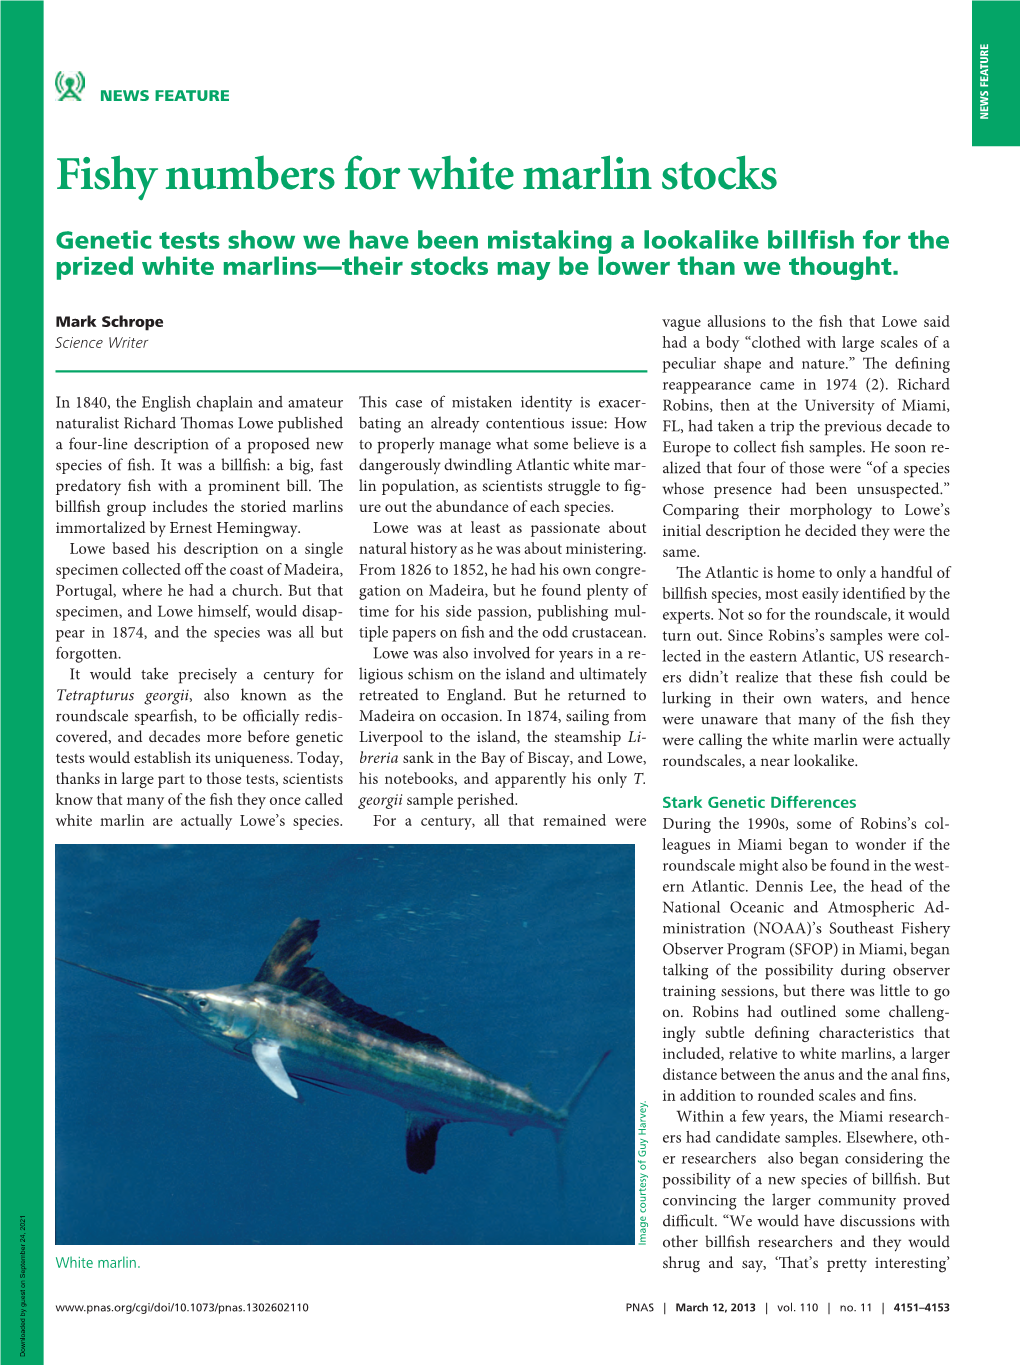 Fishy Numbers for White Marlin Stocks